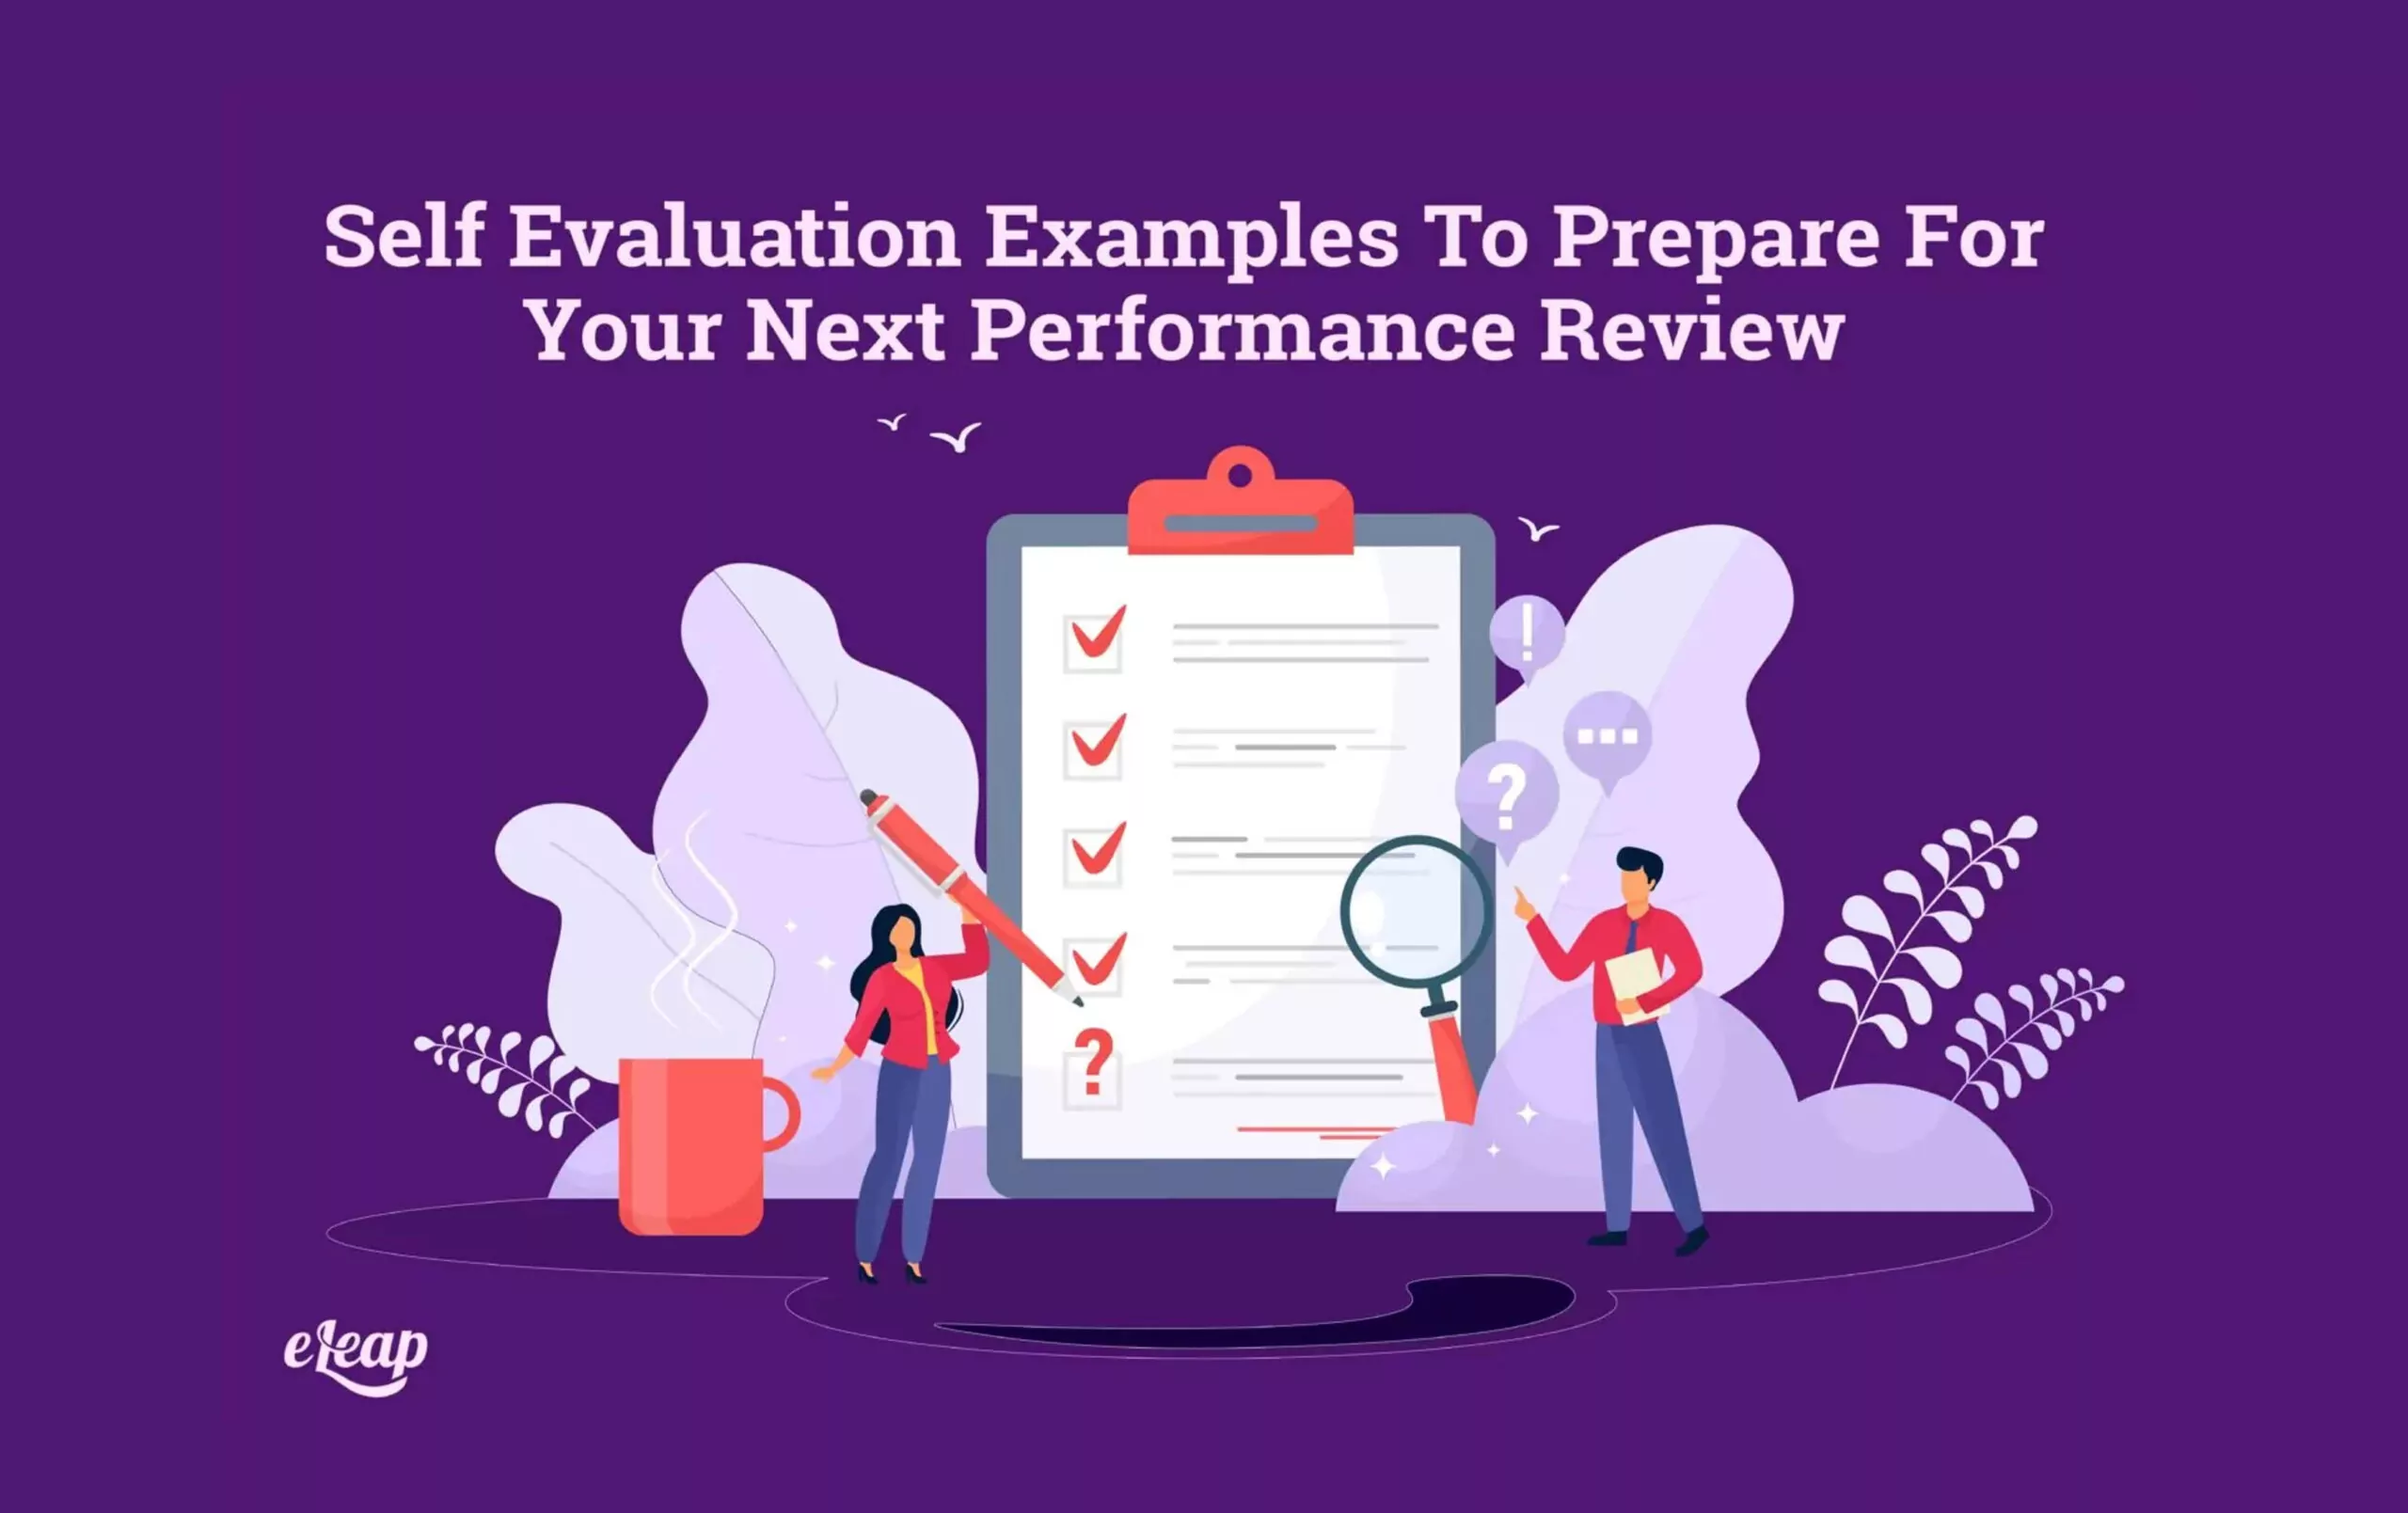 Self-Evaluation Examplesprepare-for-your-next-performance-review